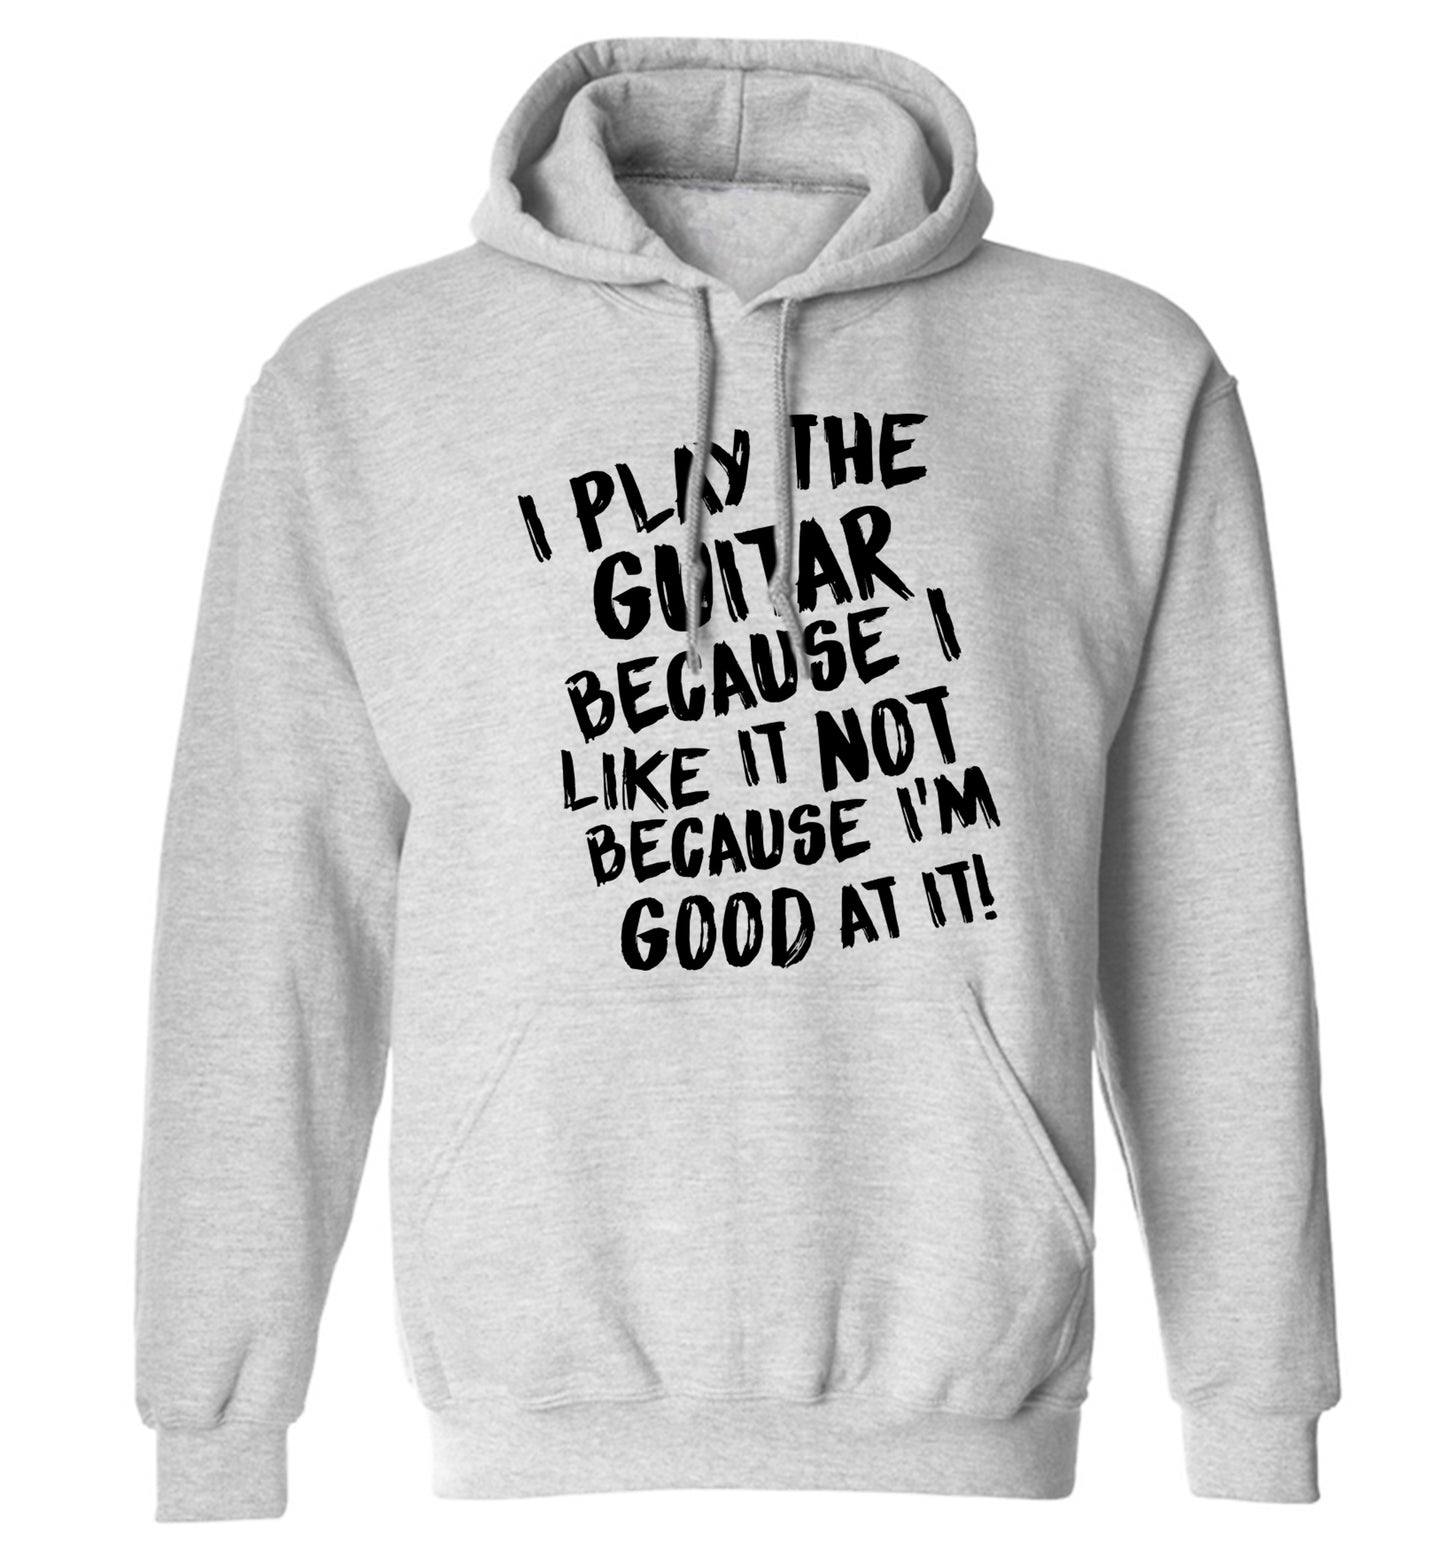 I play the guitar because I like it not because I'm good at it adults unisex grey hoodie 2XL